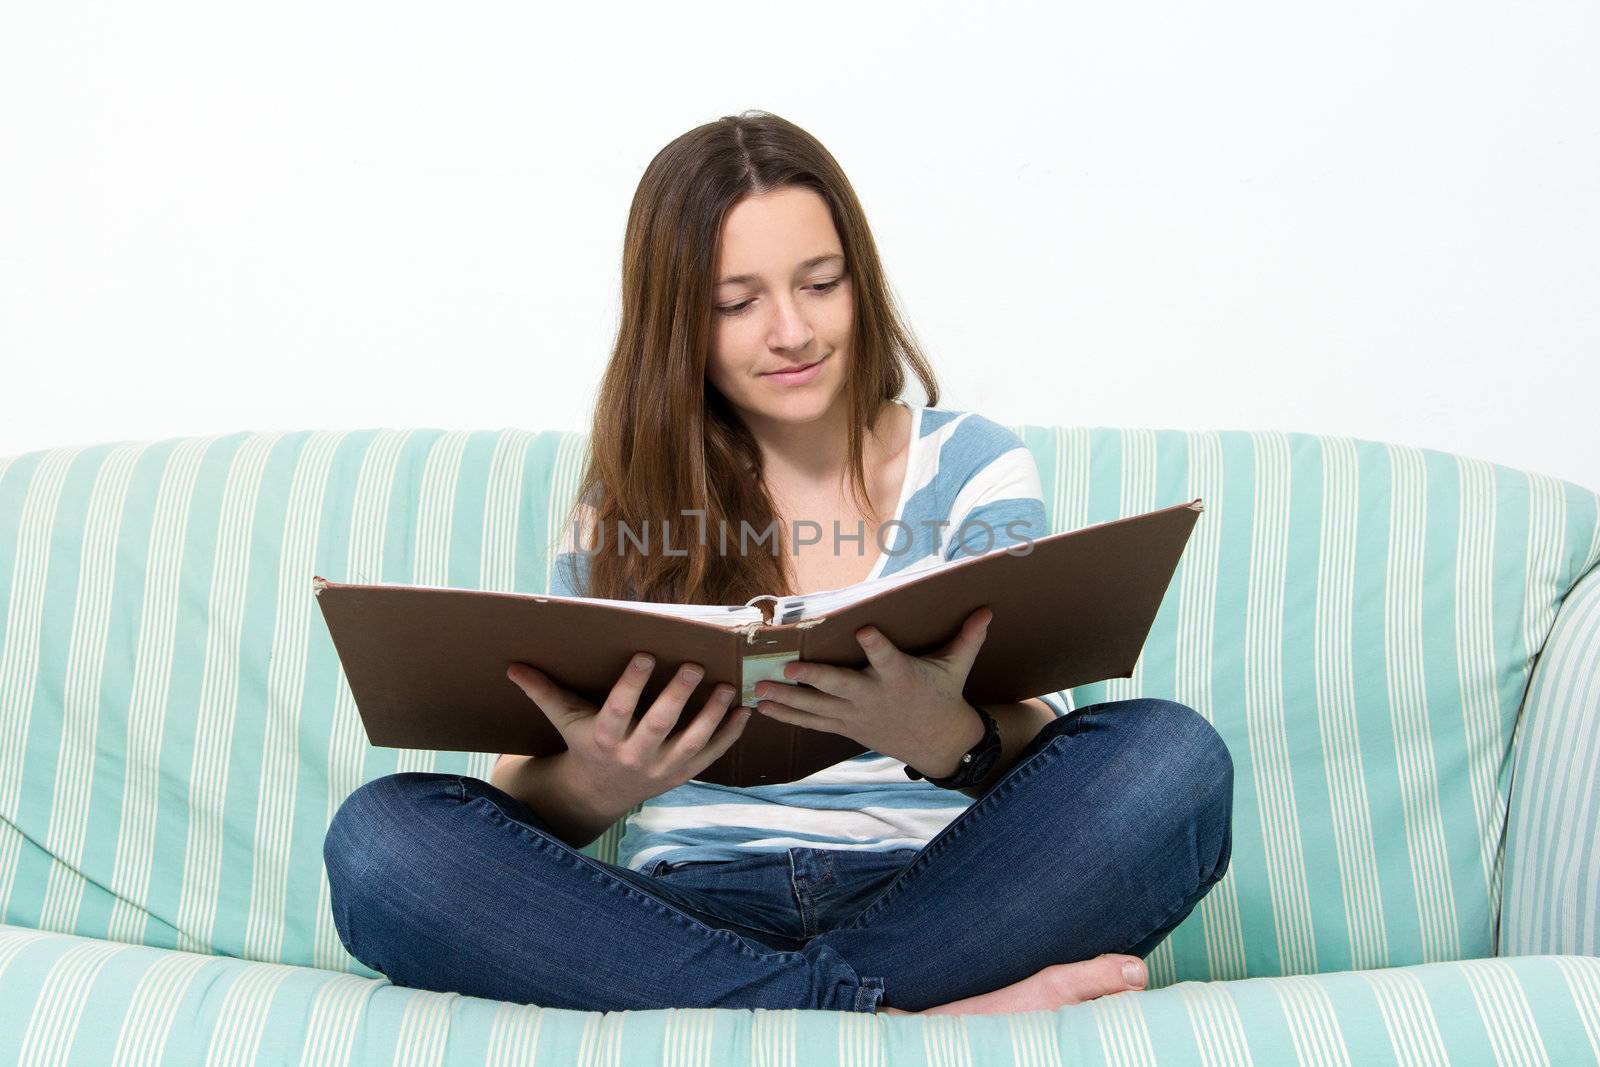 Young Brunette Teenager with blue jeans studying on couch